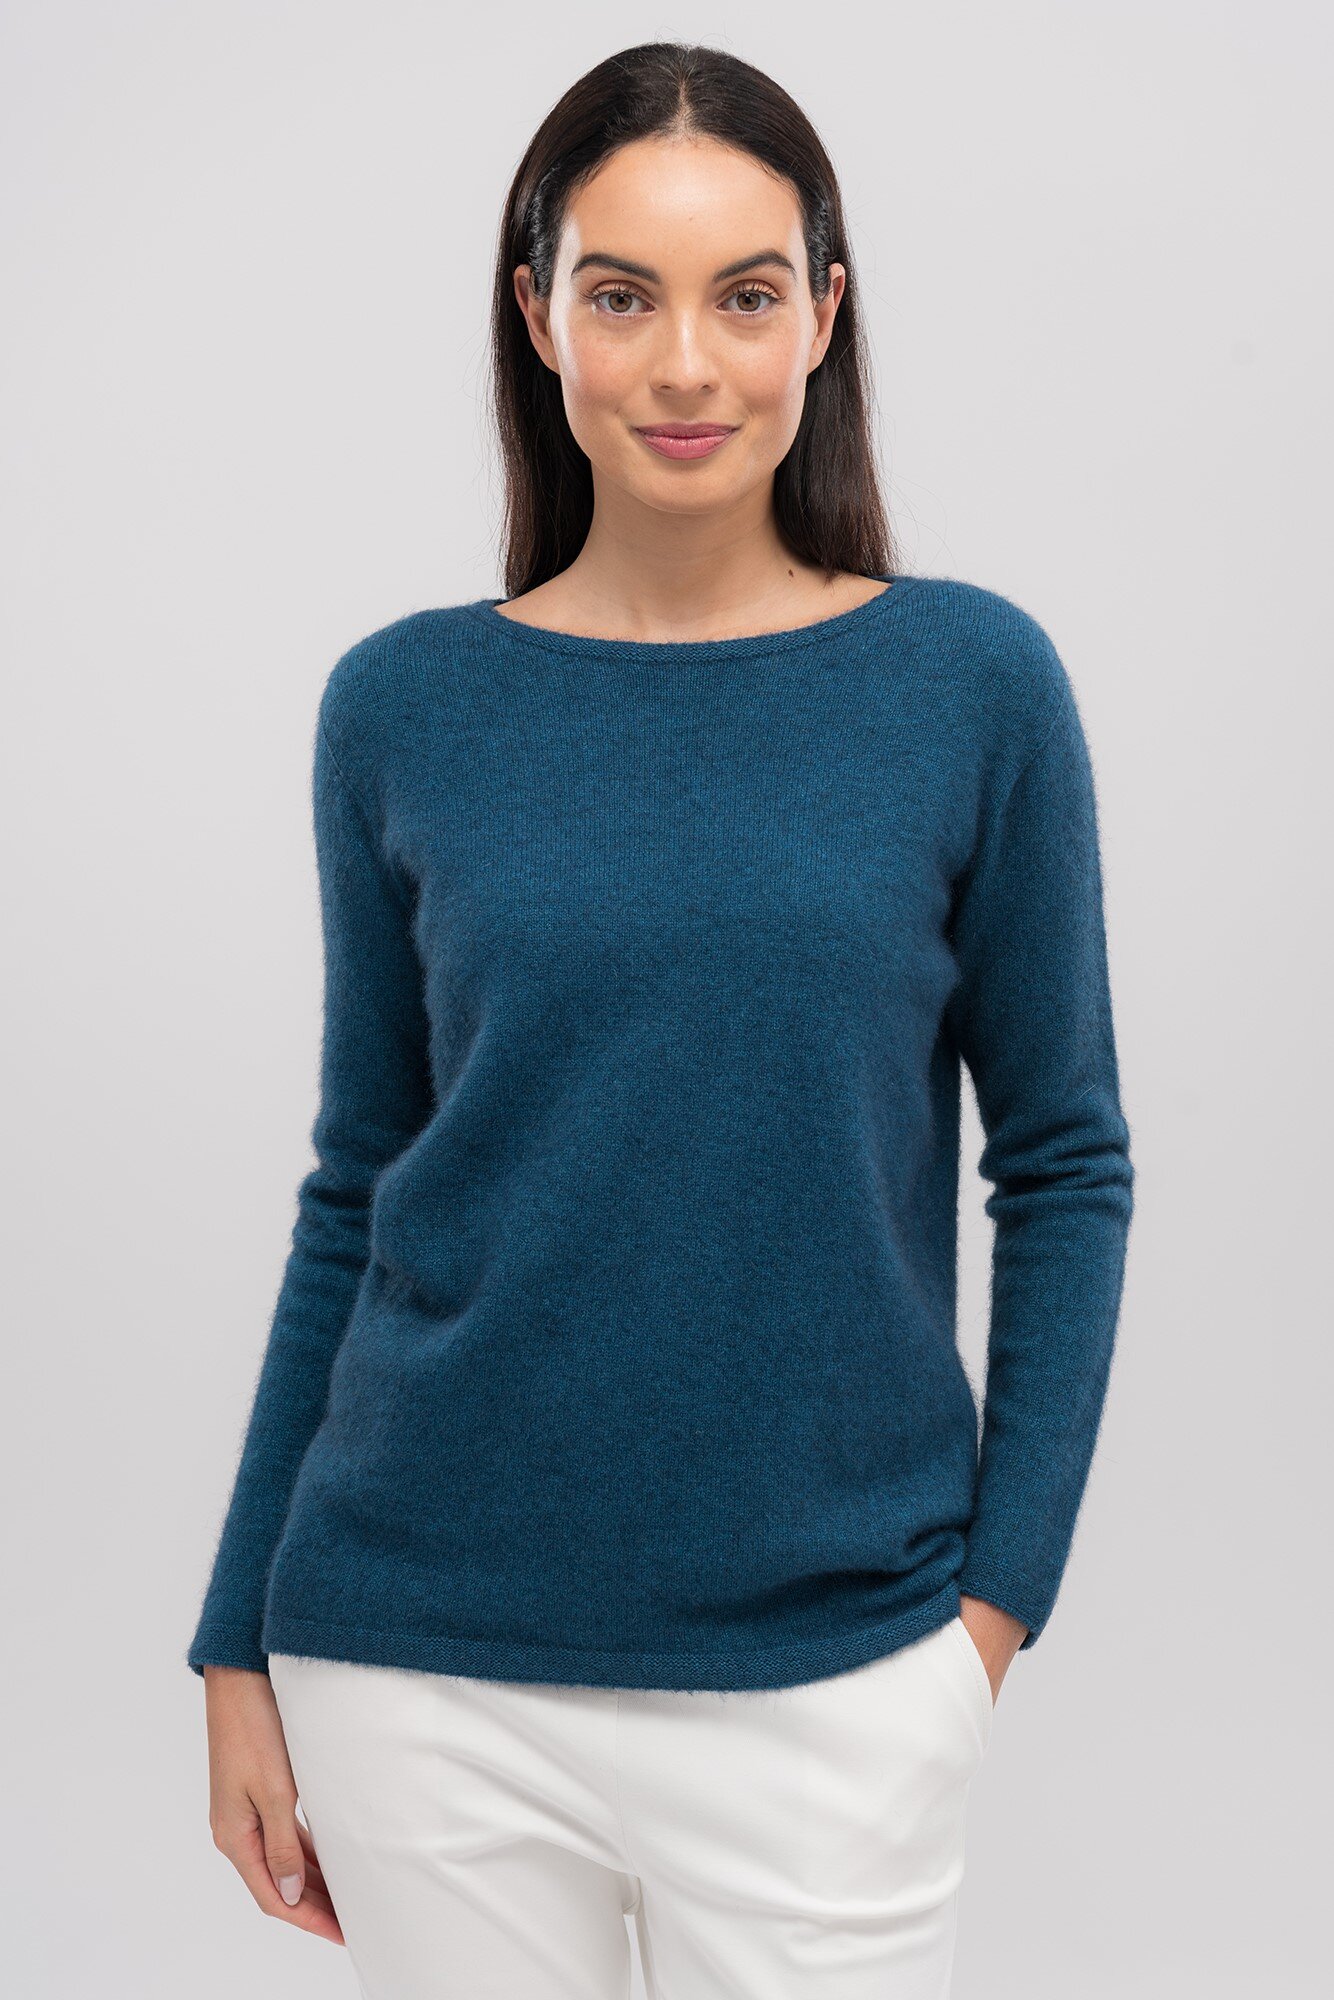 Essence Sweater (Aegean) - Labels-Untouched World : Just Looking ...